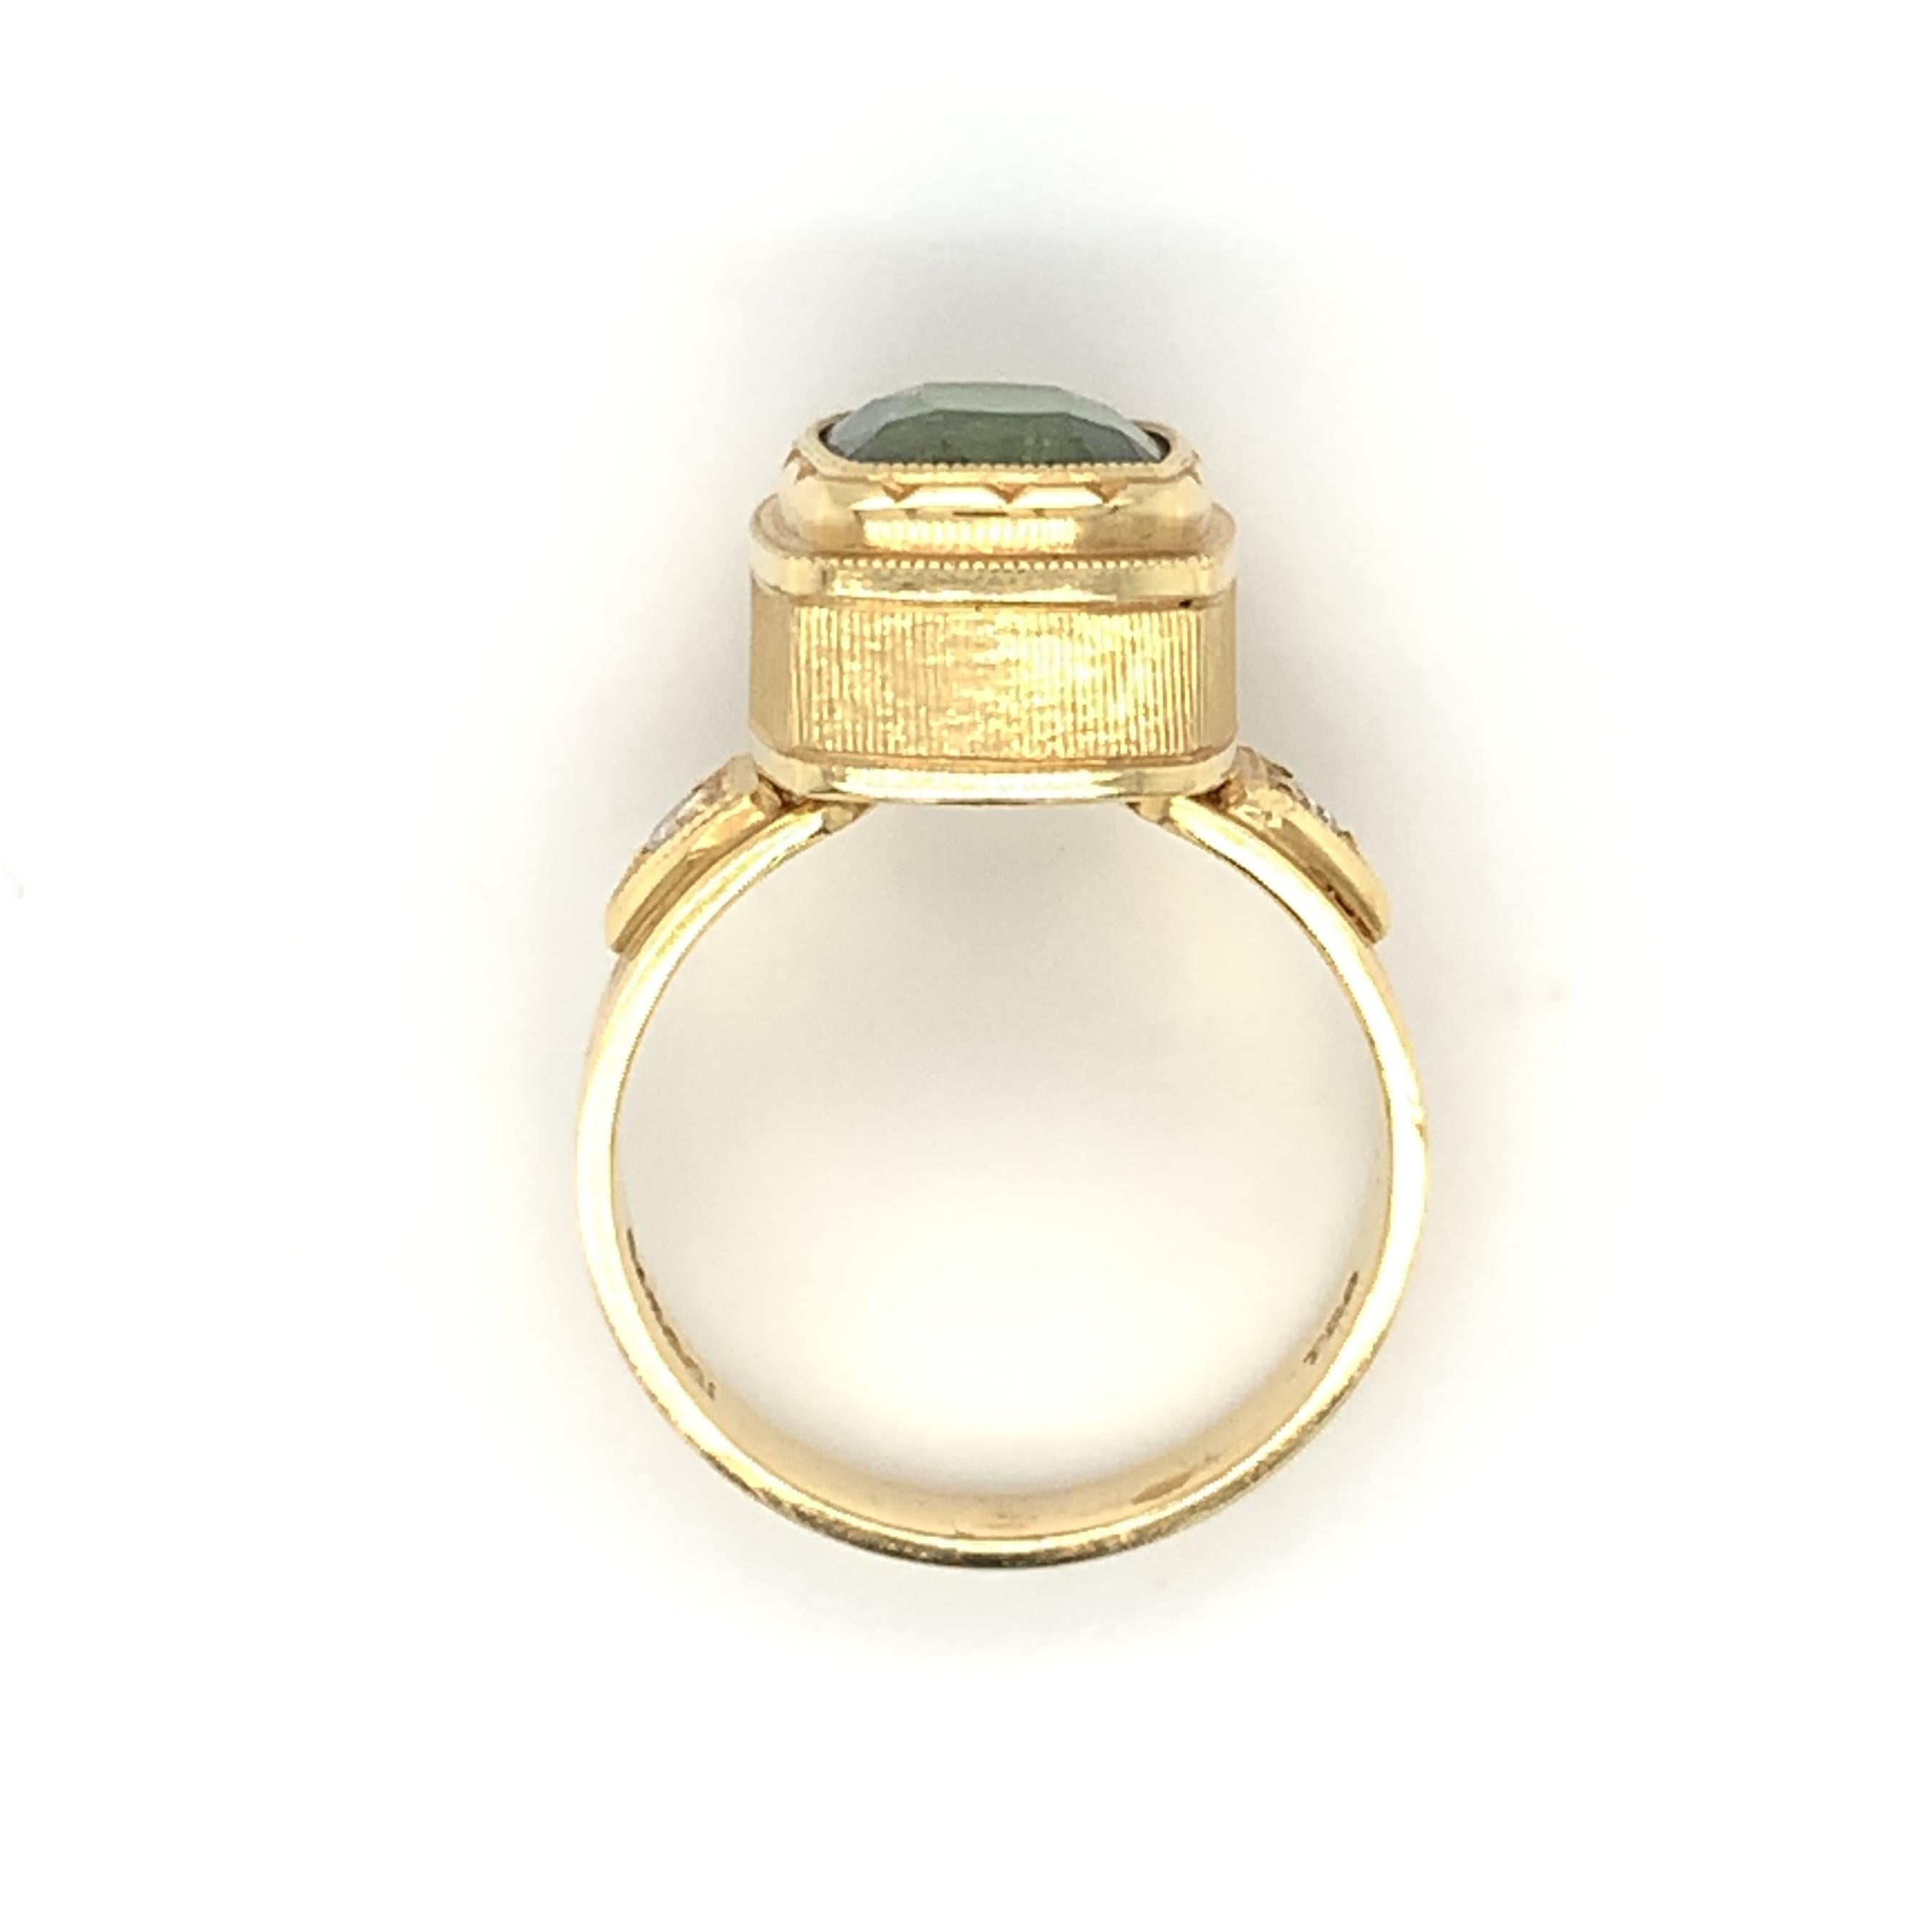 5.38 ct. Green Zircon and Diamond Engraved Band Ring in 18k Yellow Gold In New Condition For Sale In Los Angeles, CA